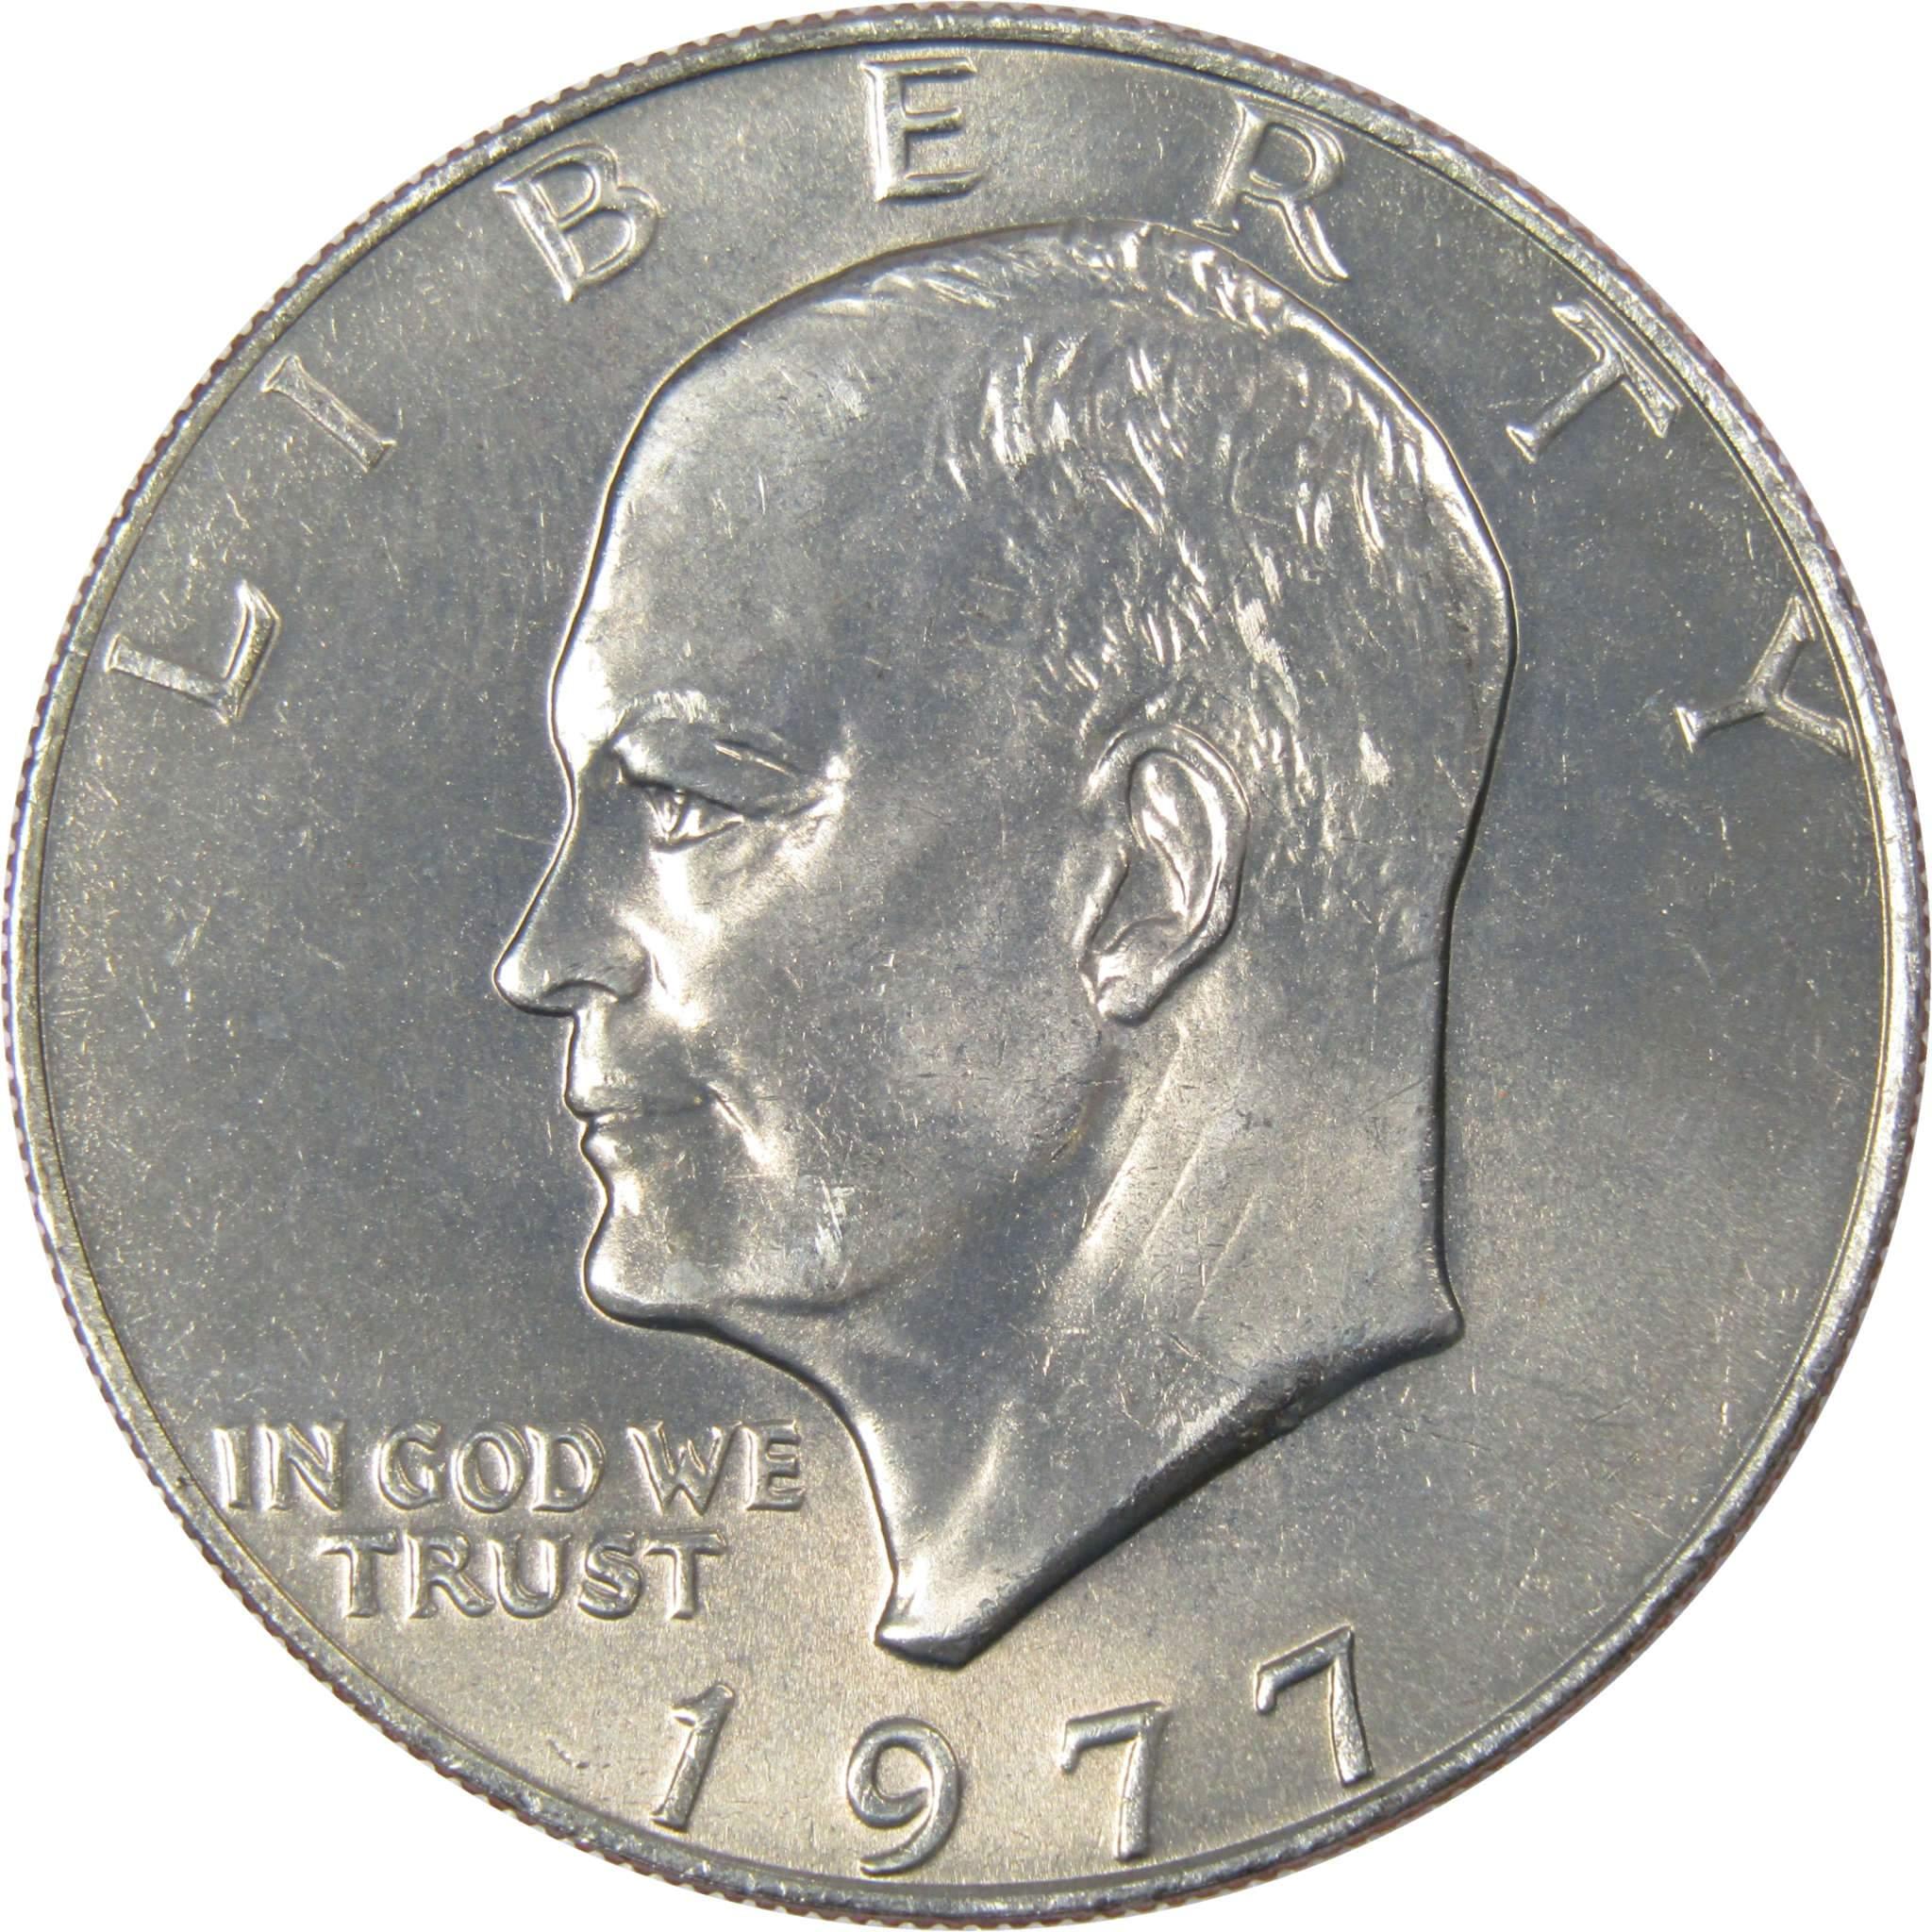 1977 Eisenhower Dollar BU Uncirculated Mint State Clad IKE $1 US Coin